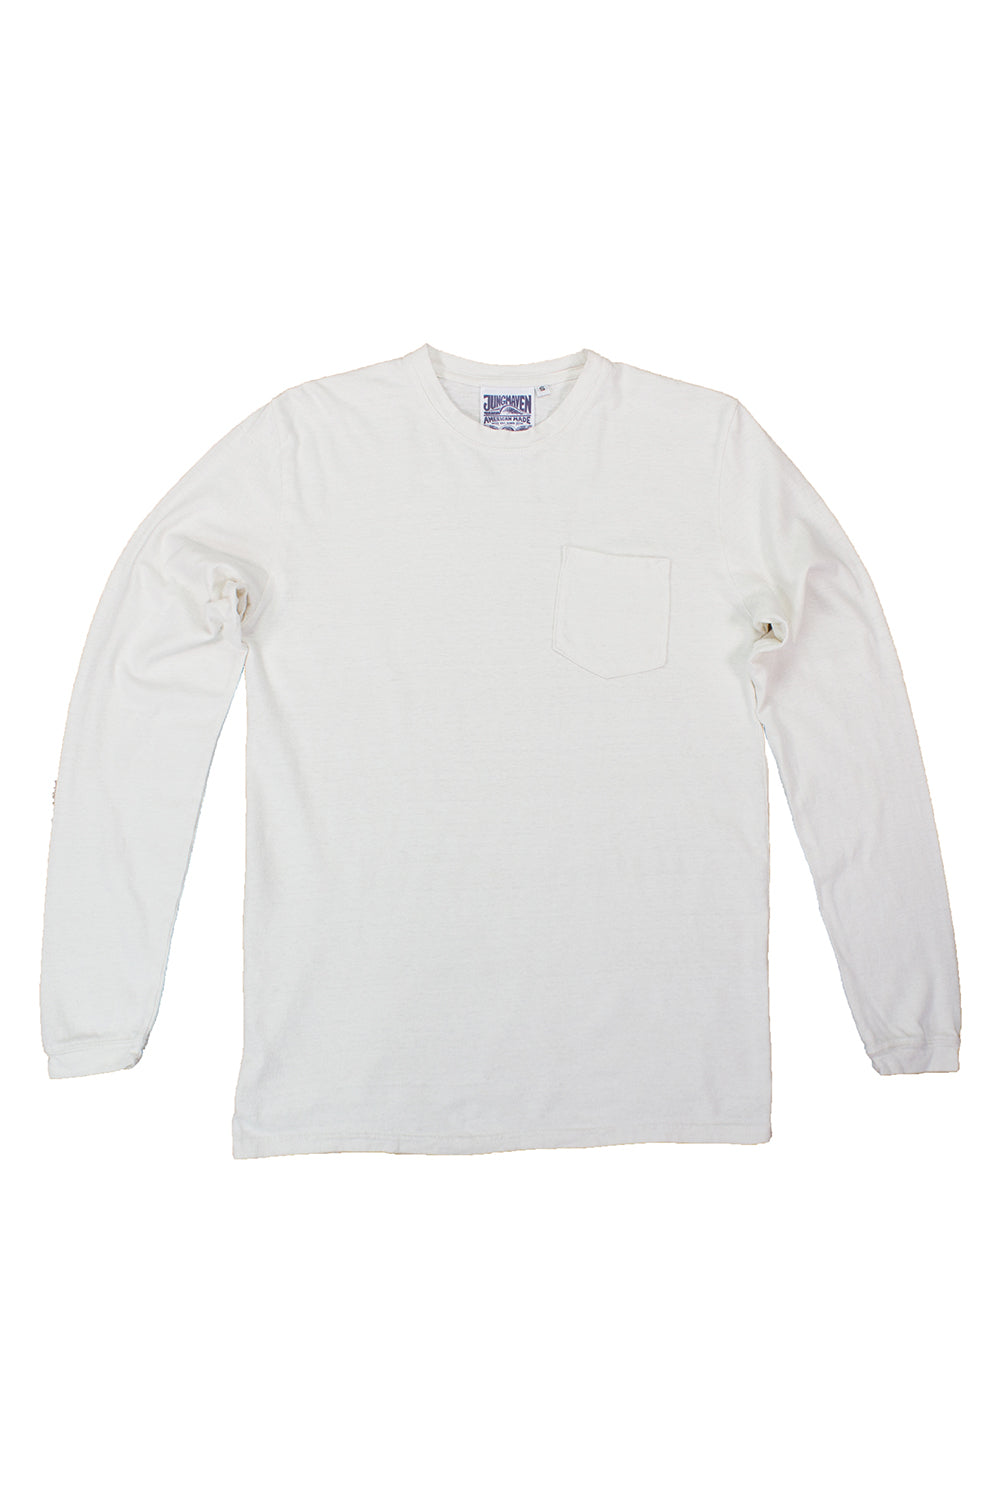 Baja Long Sleeve Pocket Tee | Jungmaven Hemp Clothing & Accessories / Color: Washed White